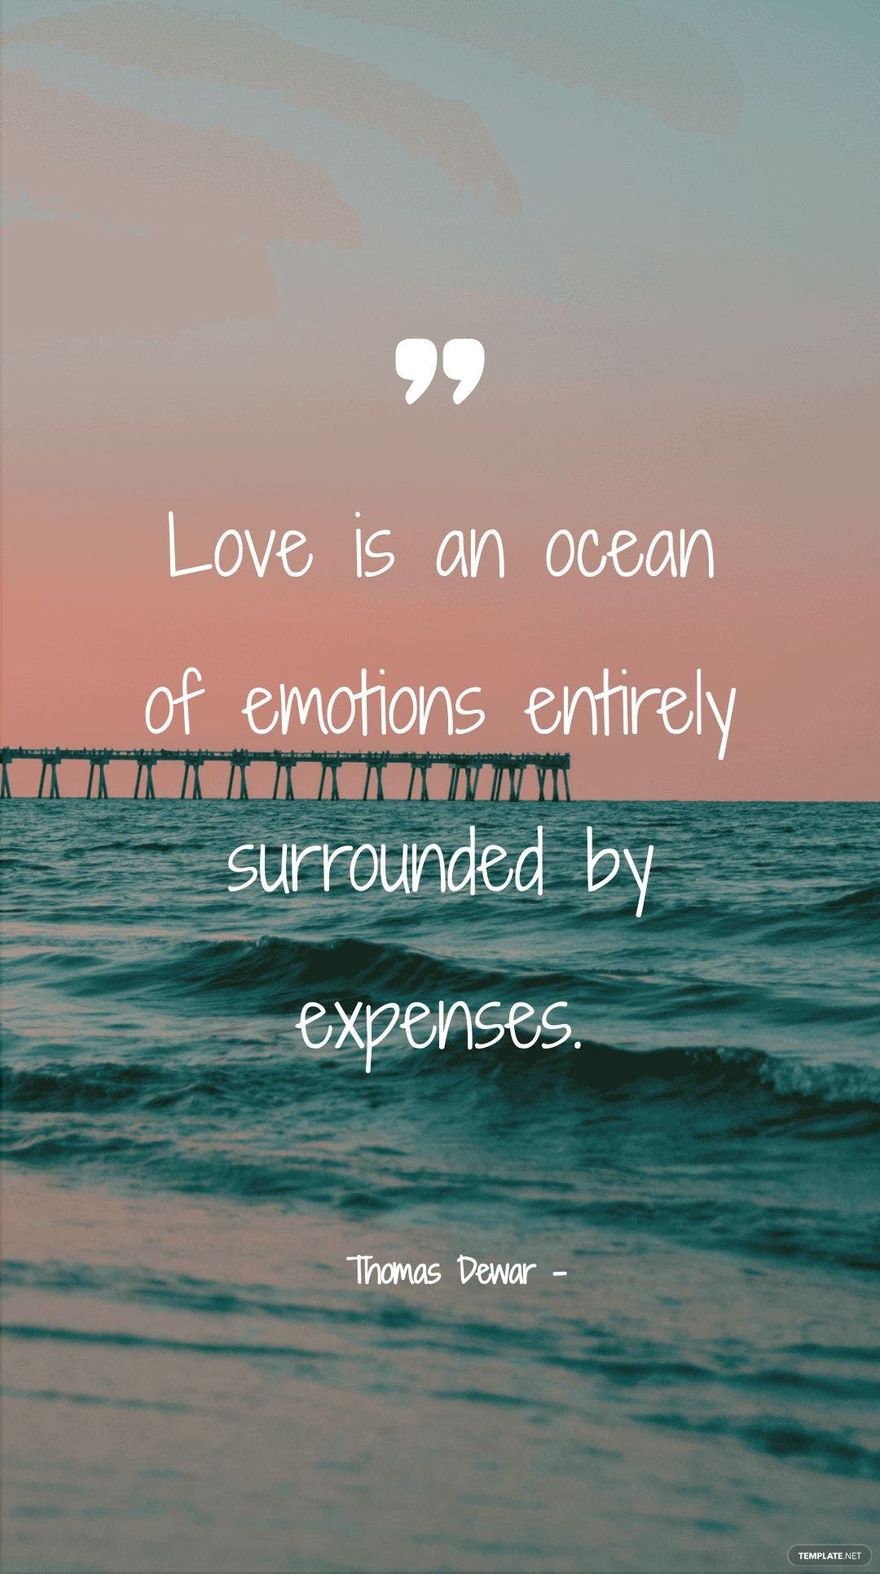 Thomas Dewar - “Love is an ocean of emotions entirely surrounded by expenses.”